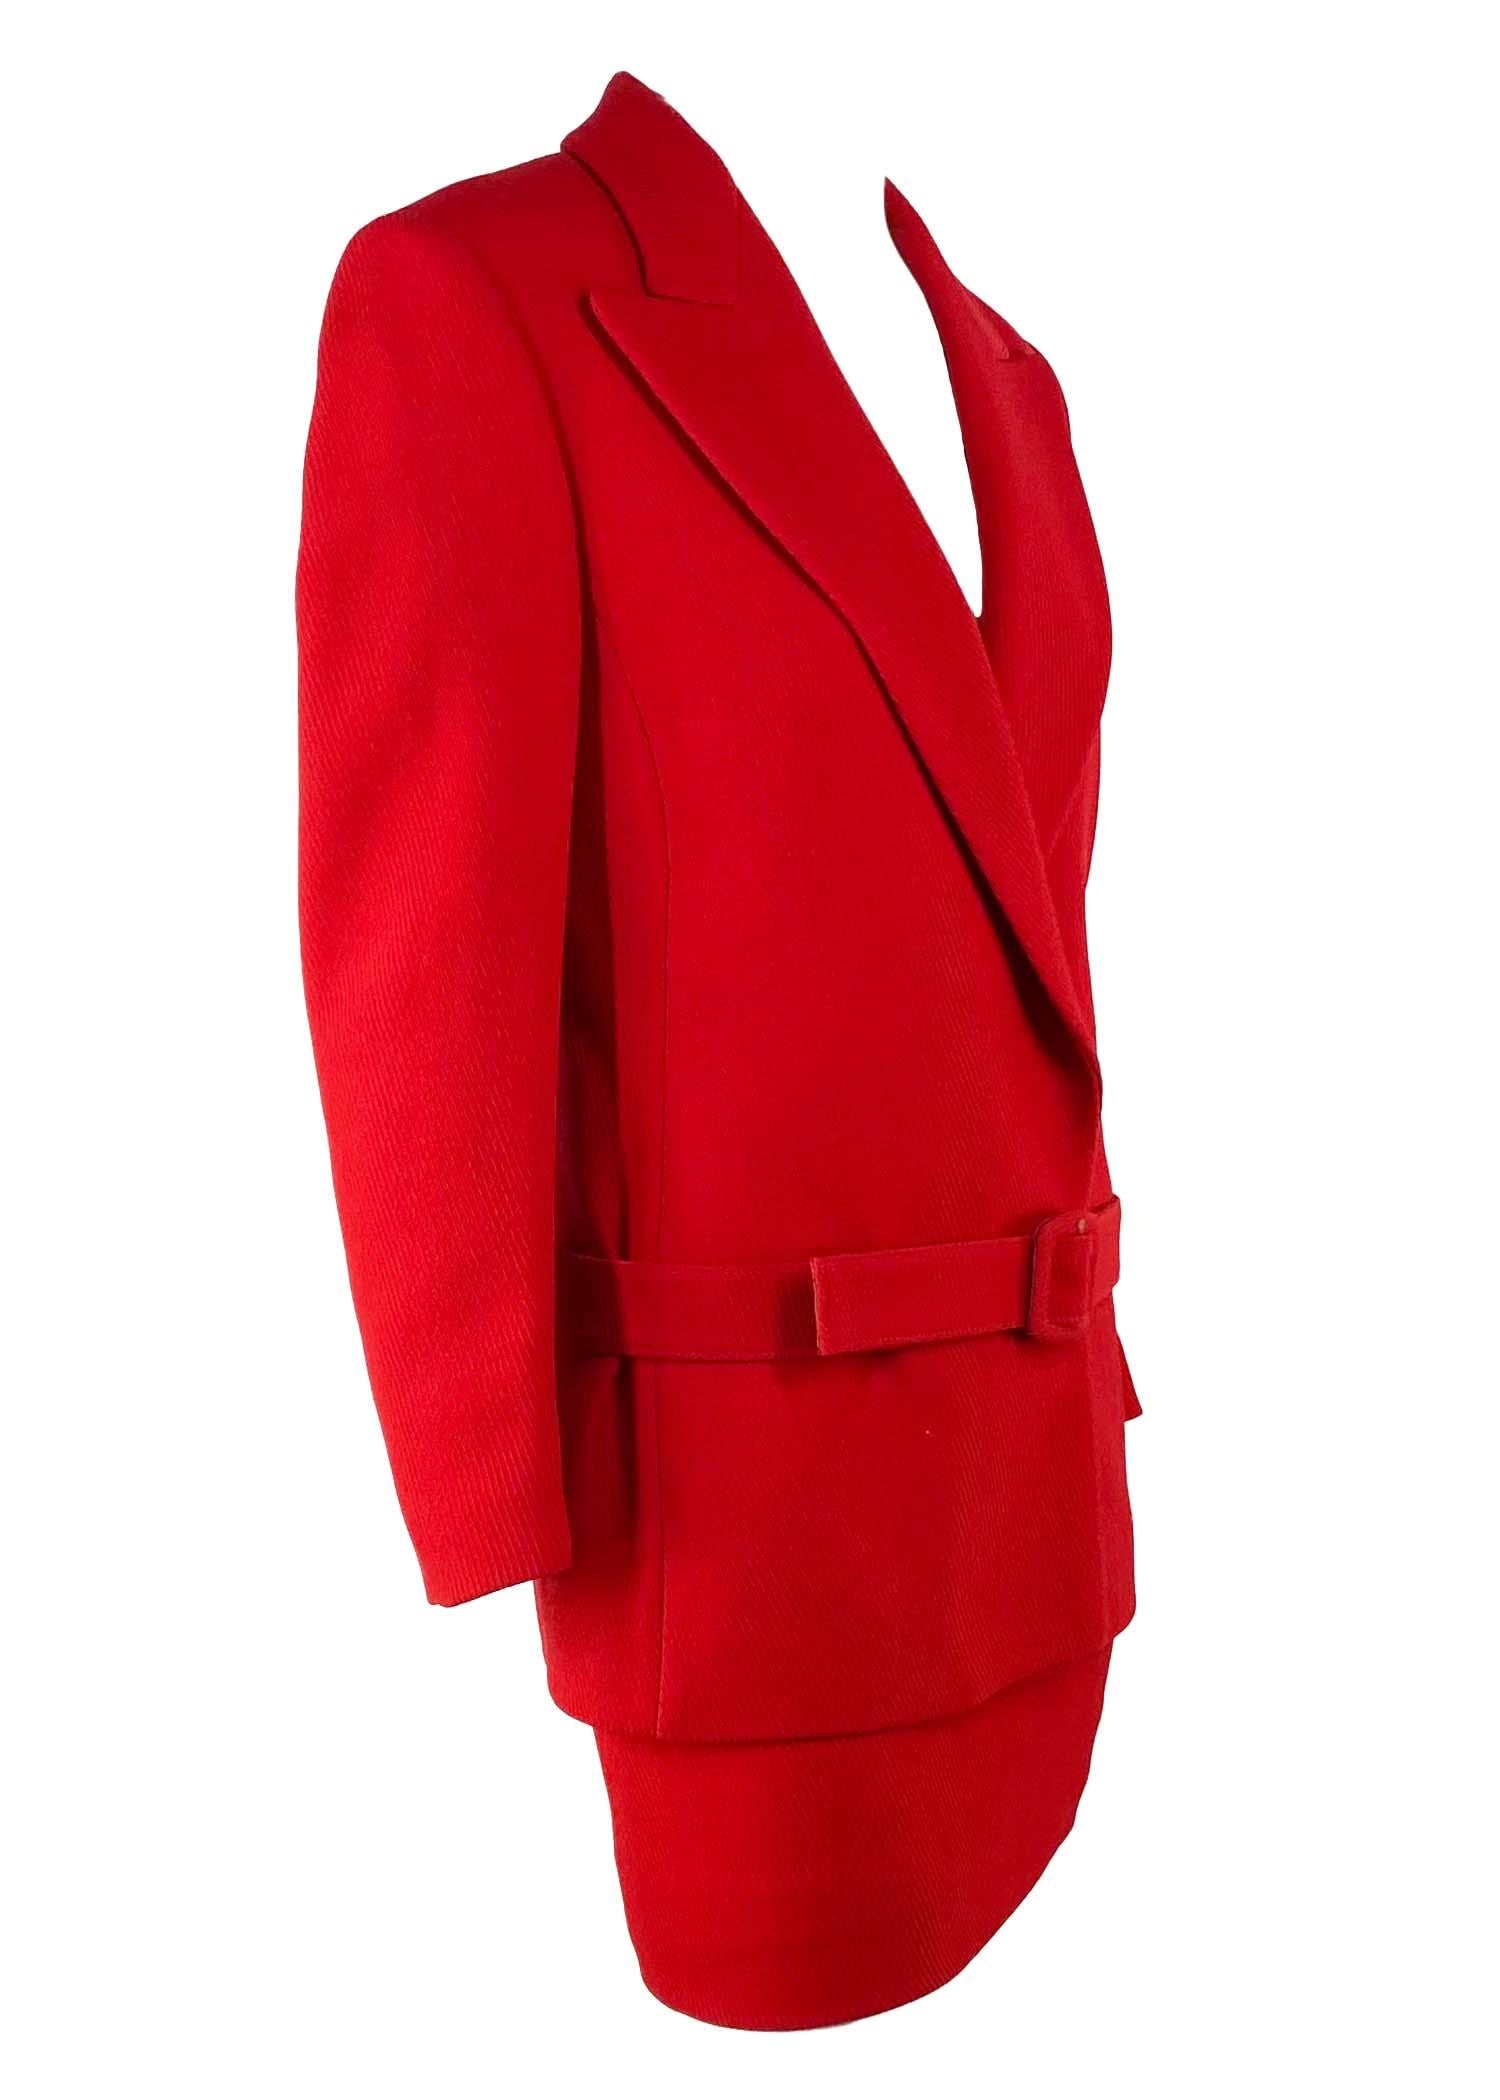 NWT F/W 1997 Gianni Versace Final Runway Red Wool Belted Skirt Suit New For Sale 2